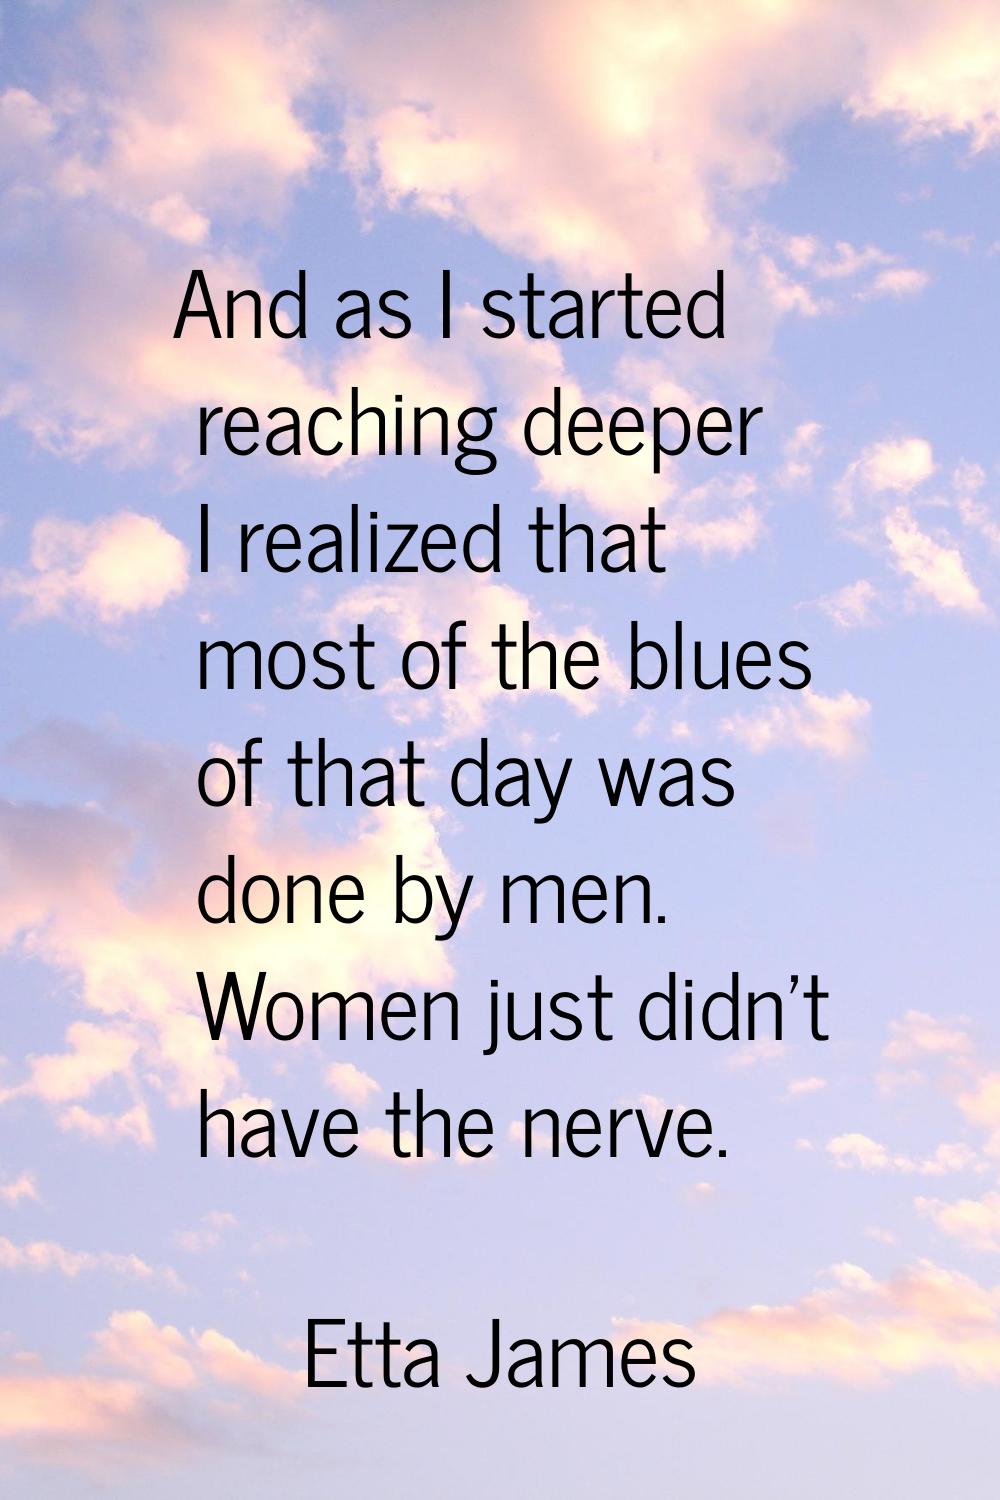 And as I started reaching deeper I realized that most of the blues of that day was done by men. Wom